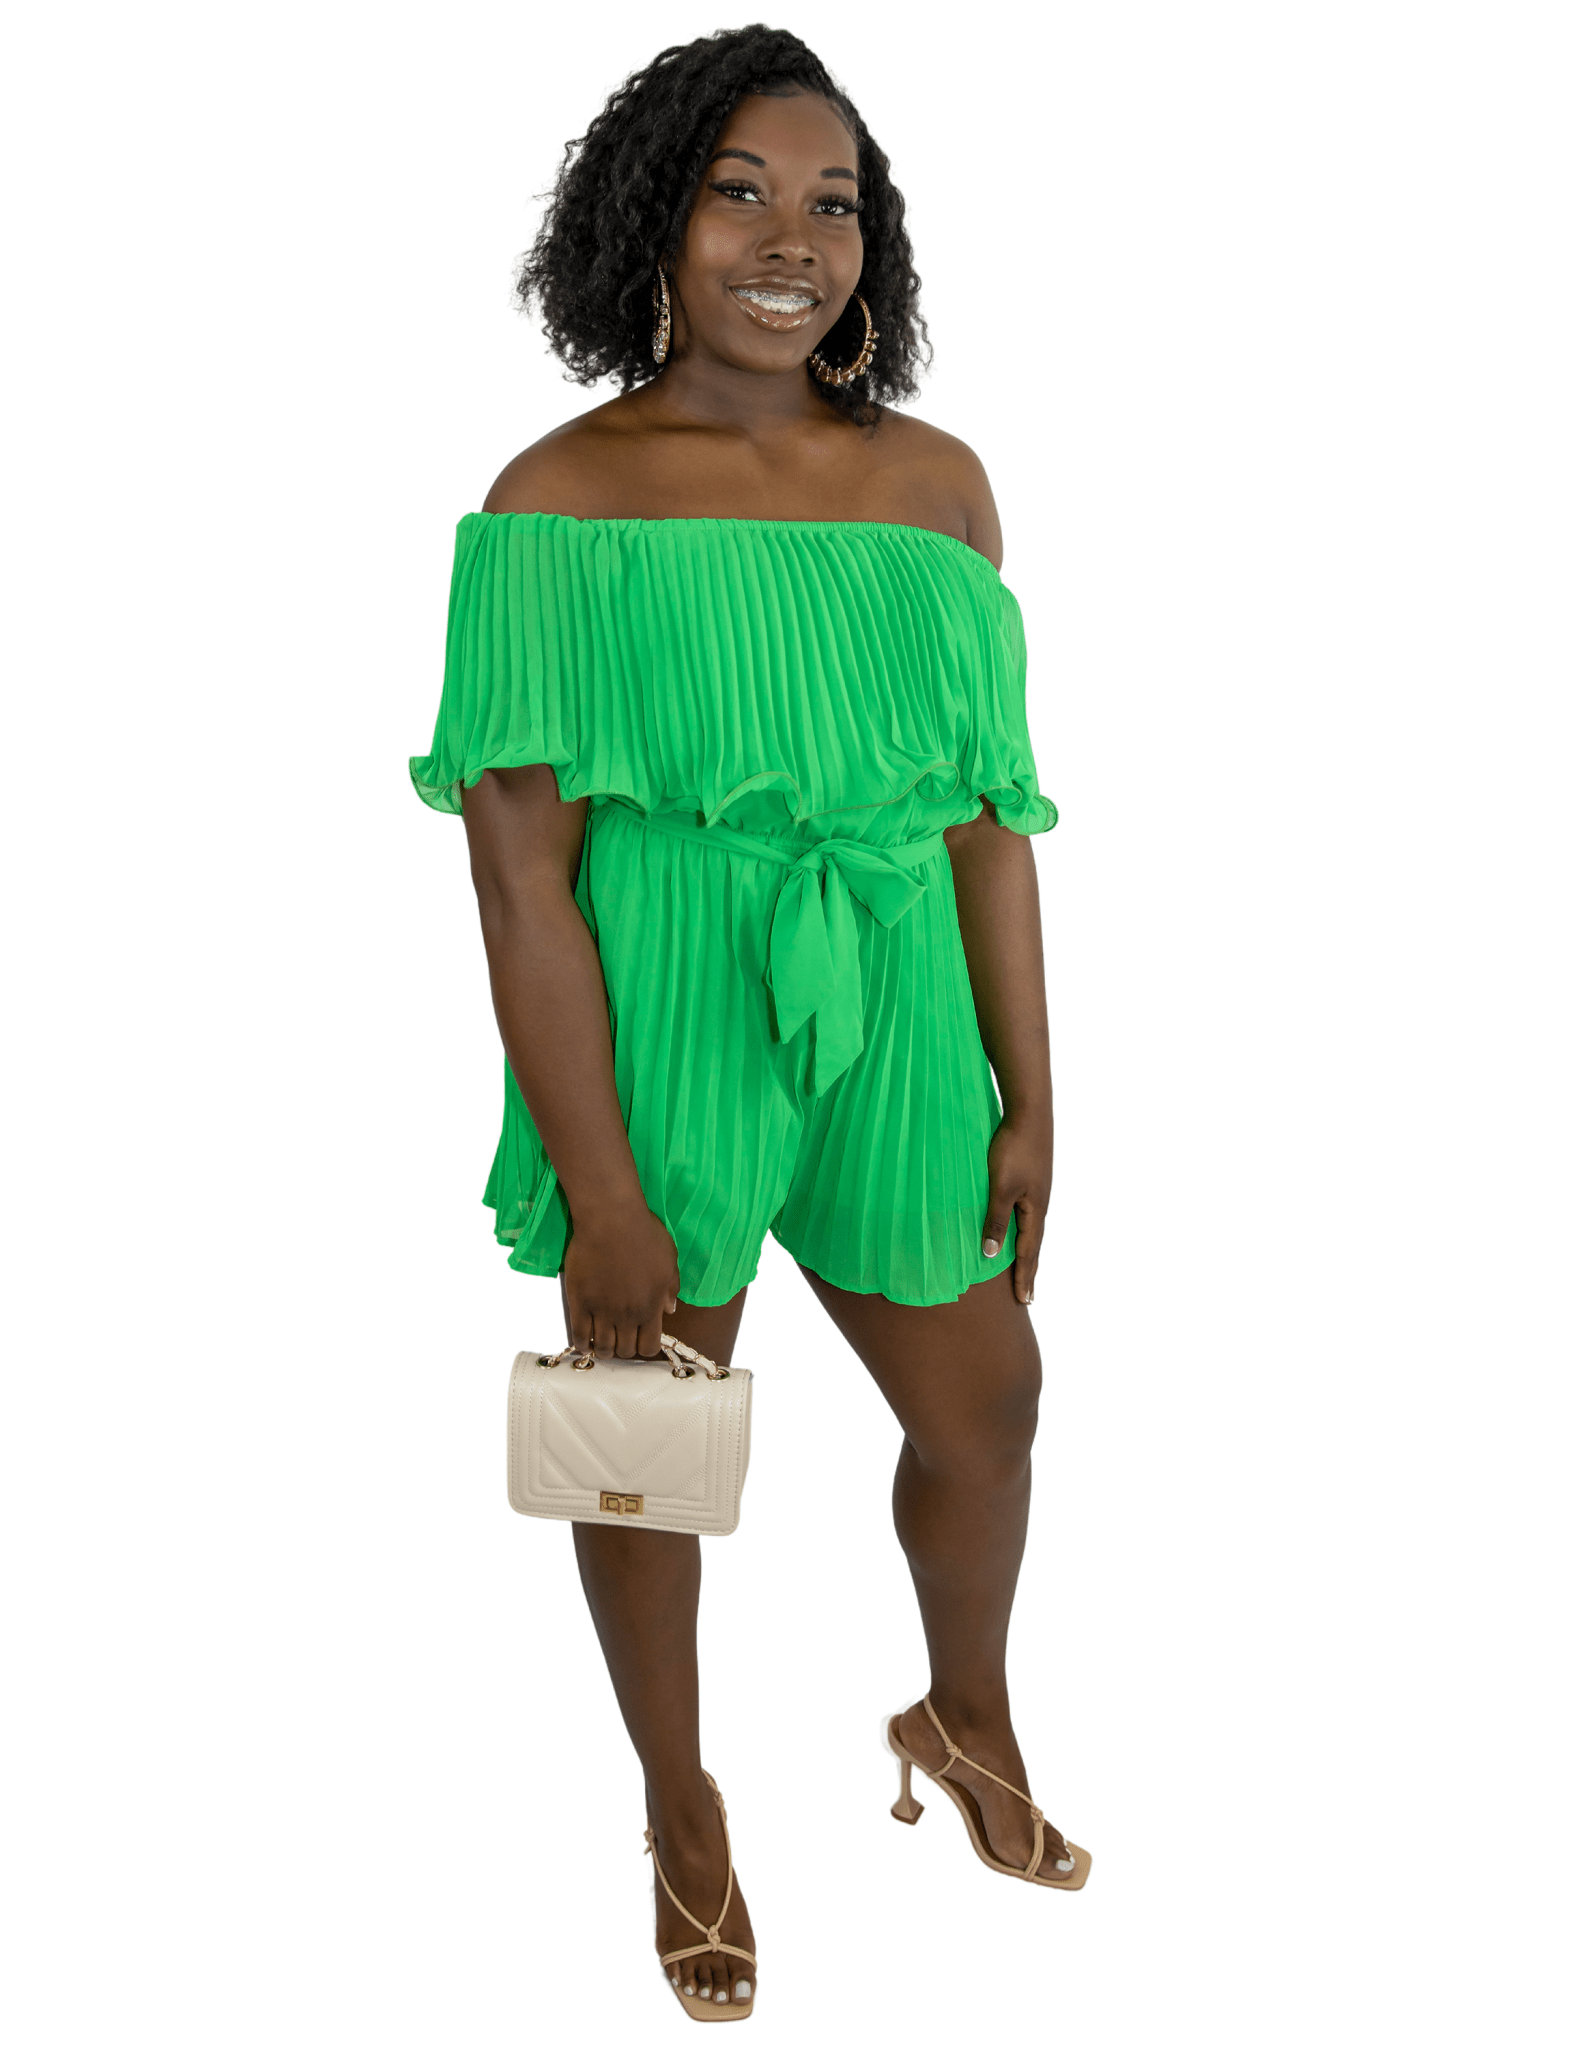 
  
  Lucky Romper - Stylish and Comfortable
  
